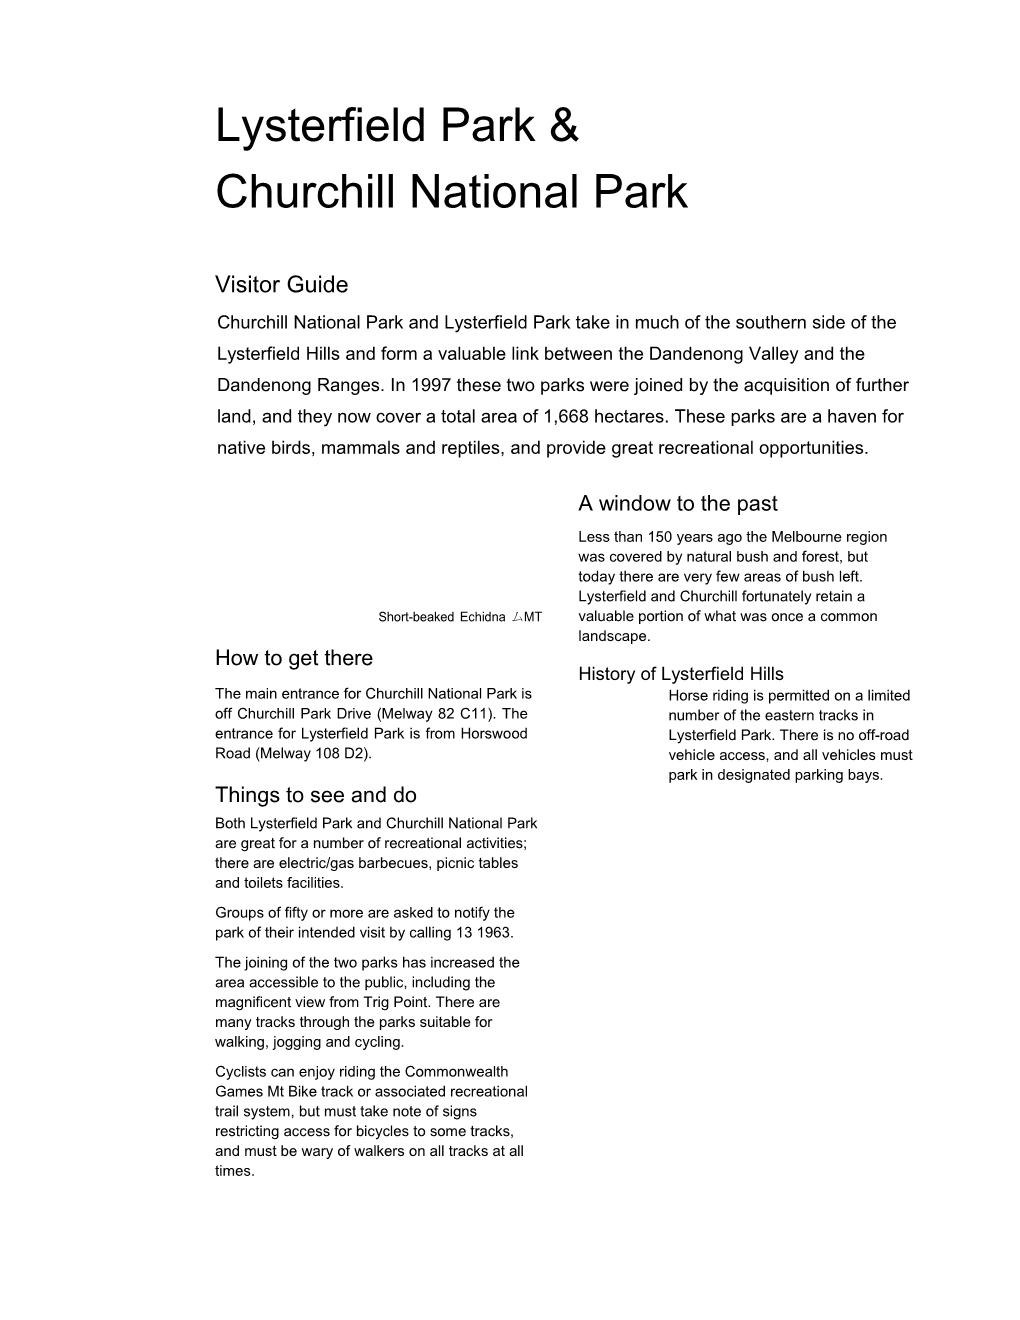 Lysterfield Park and Churchill National Park Visitor Guide